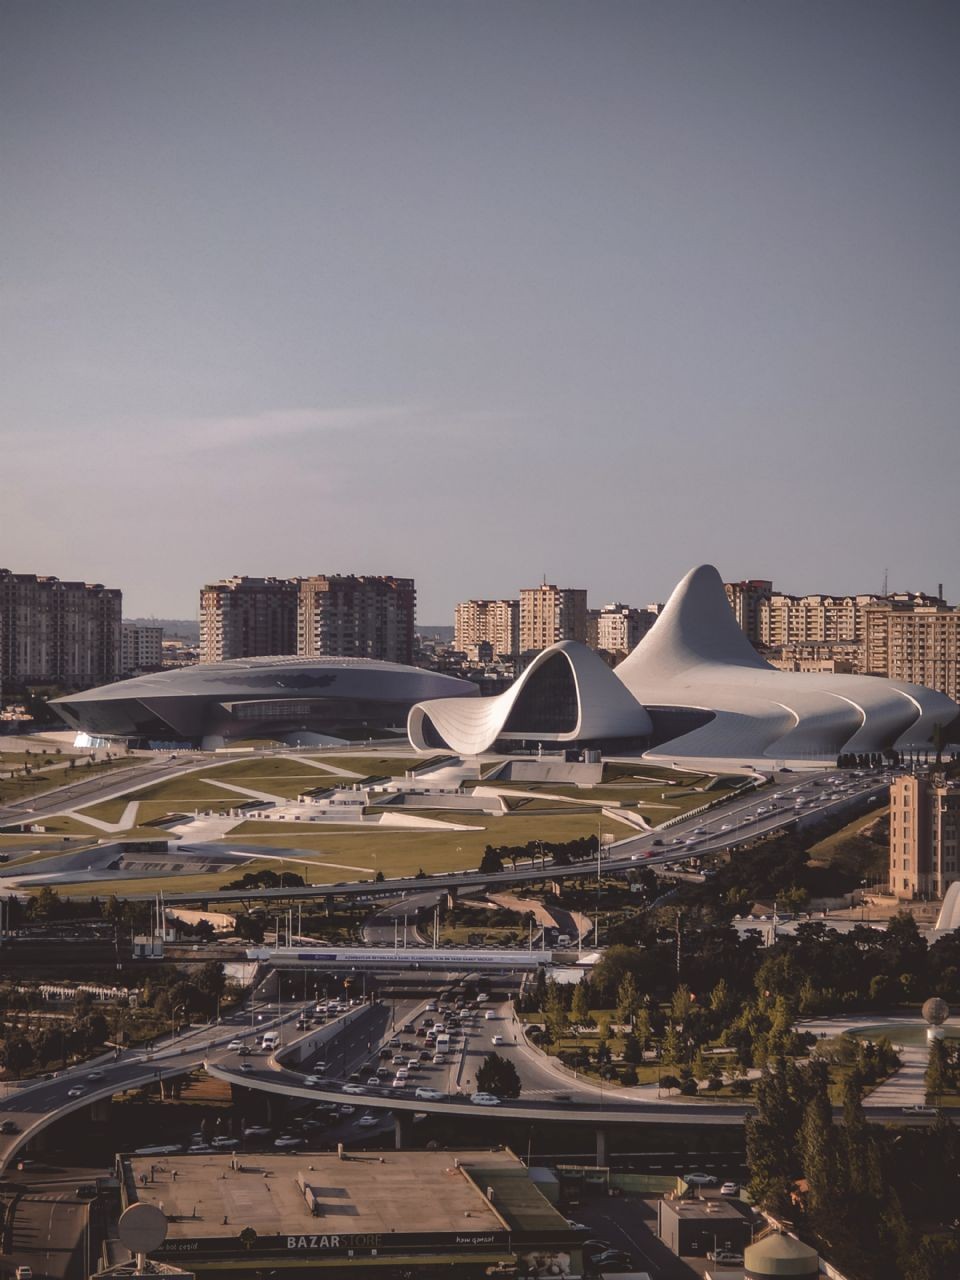 The Heydar Aliyev Center is a cultural center and museum that showcases Azerbaijan's art, culture, and history. 